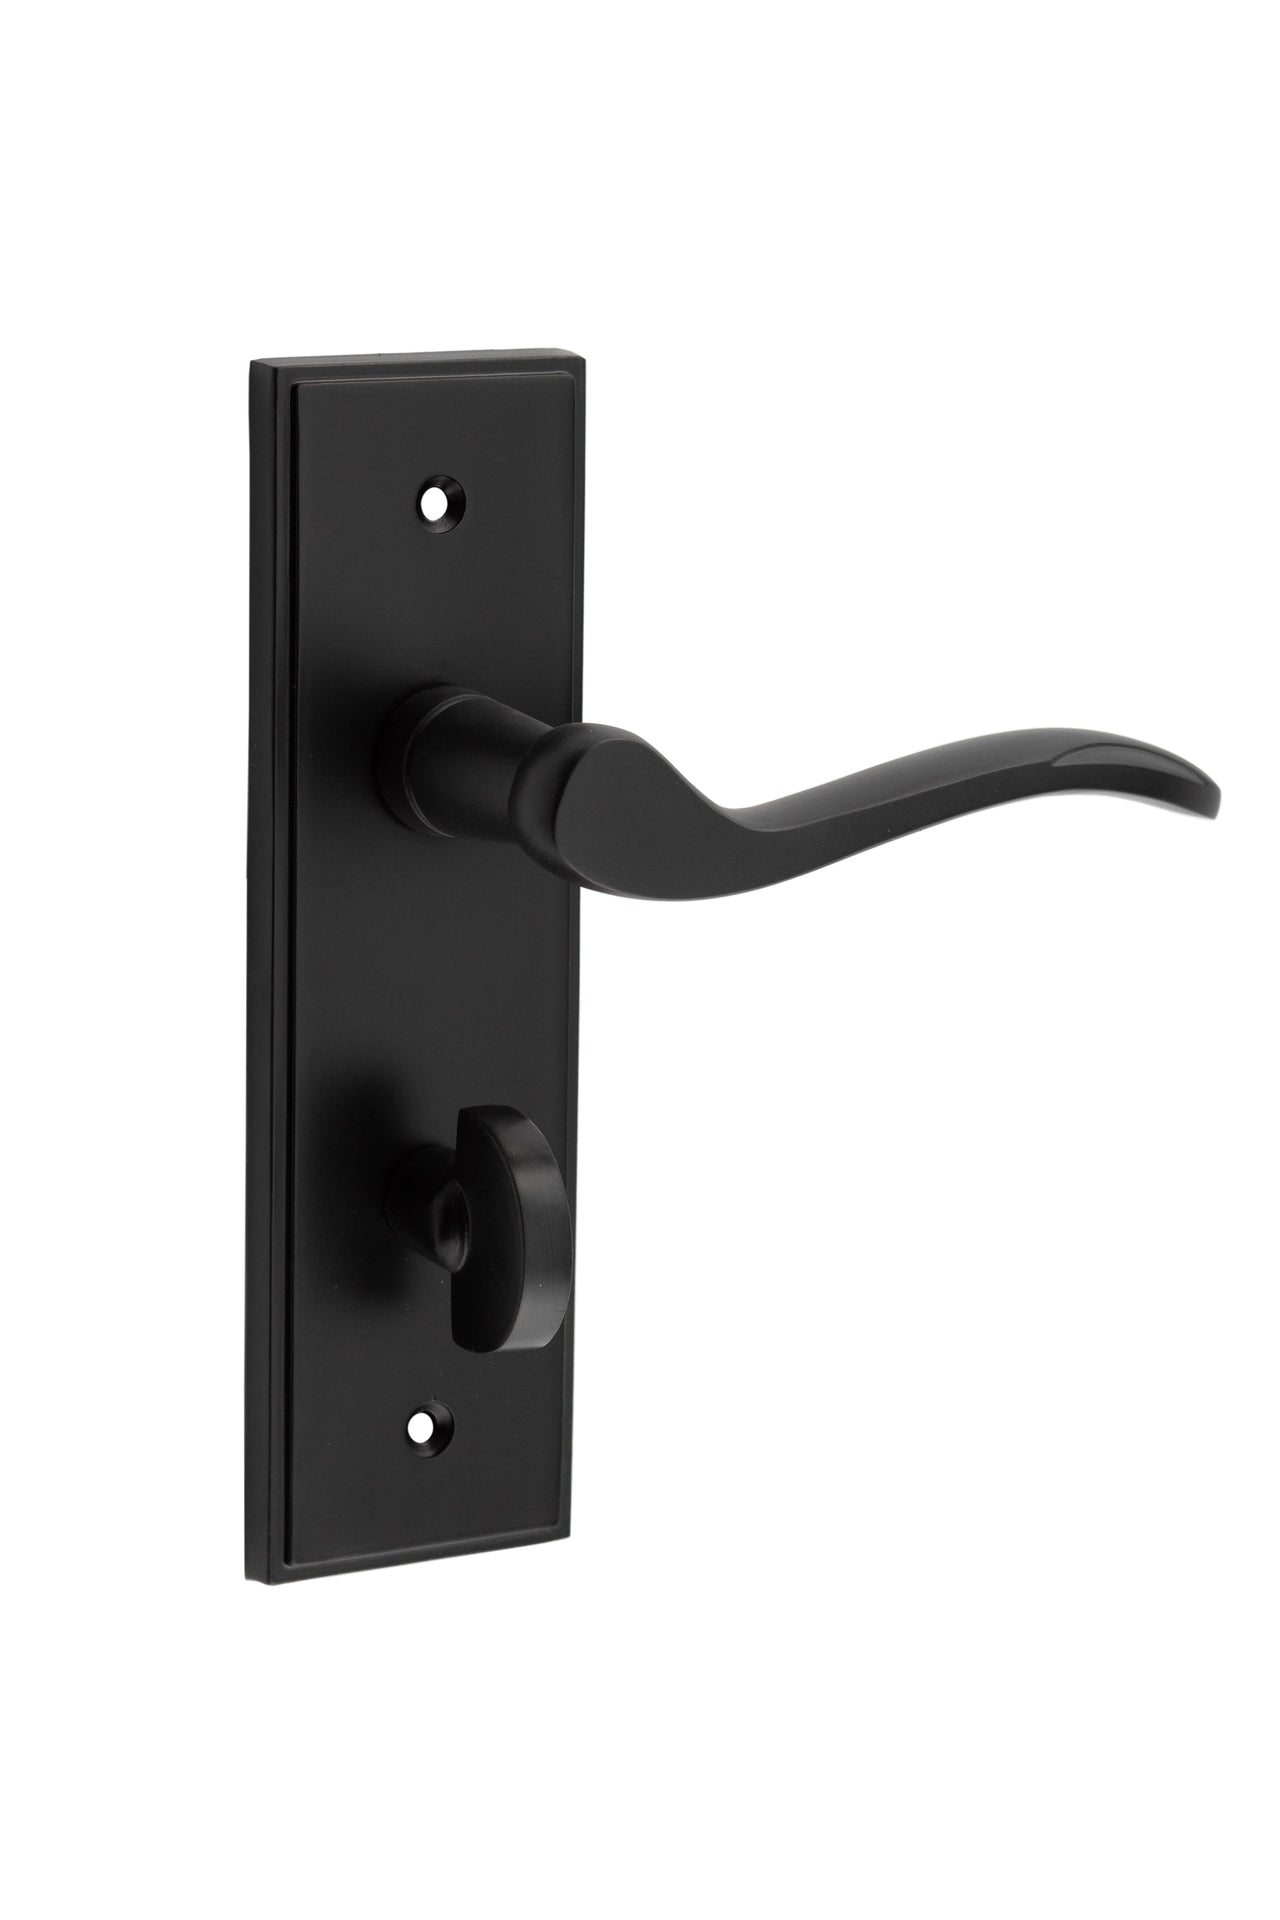 Wave Lever BATHROOM COMPLETE WITH THUMBTURN/RELEASE) - Stepped Backplate, 158mm x 46mm